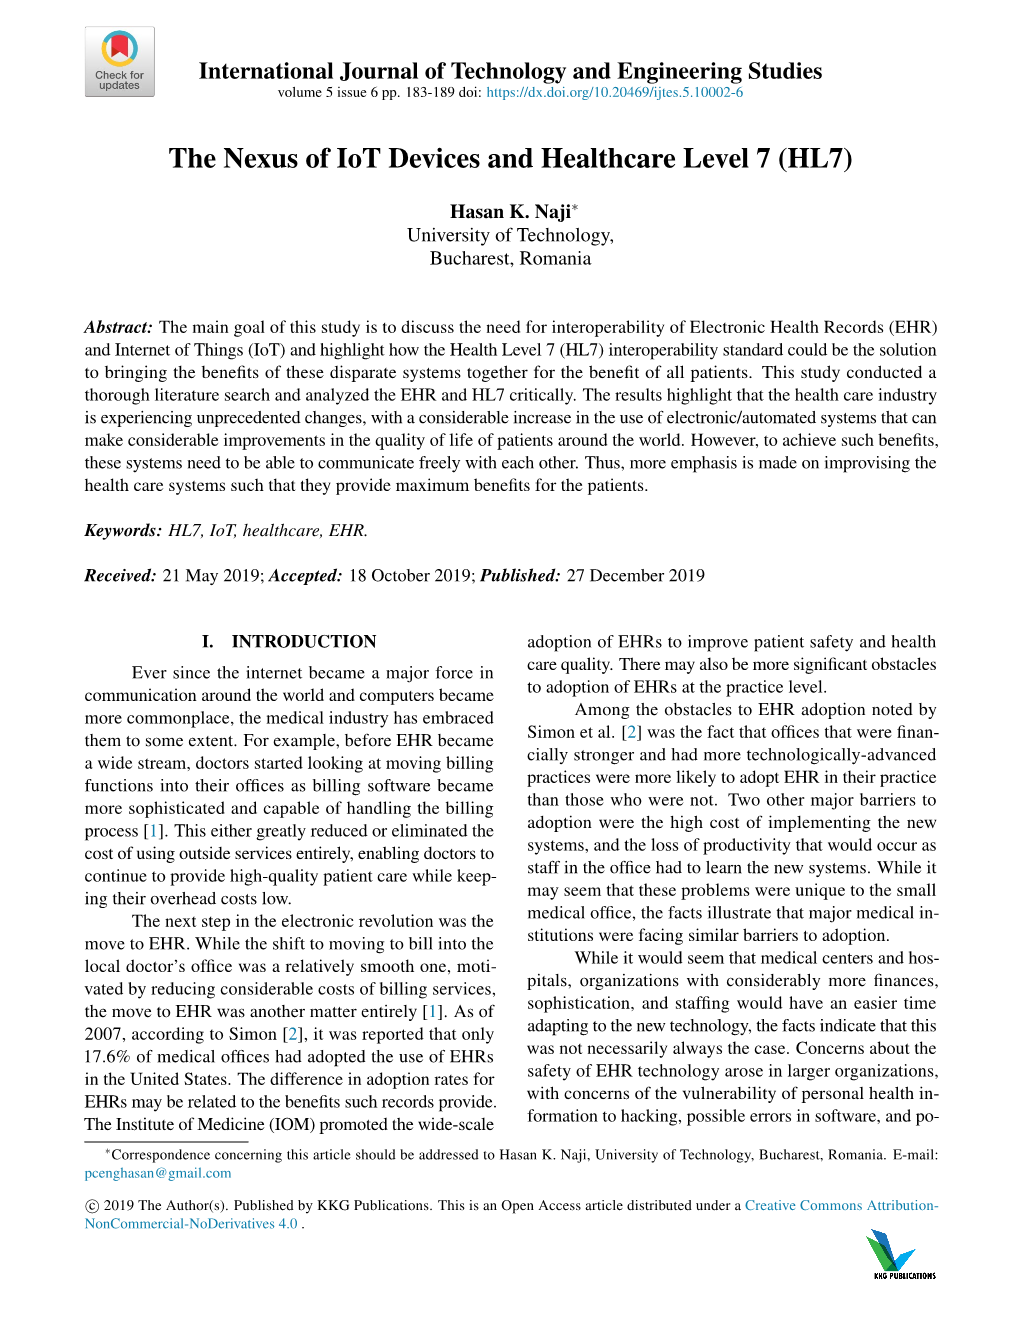 The Nexus of Iot Devices and Healthcare Level 7 (HL7)